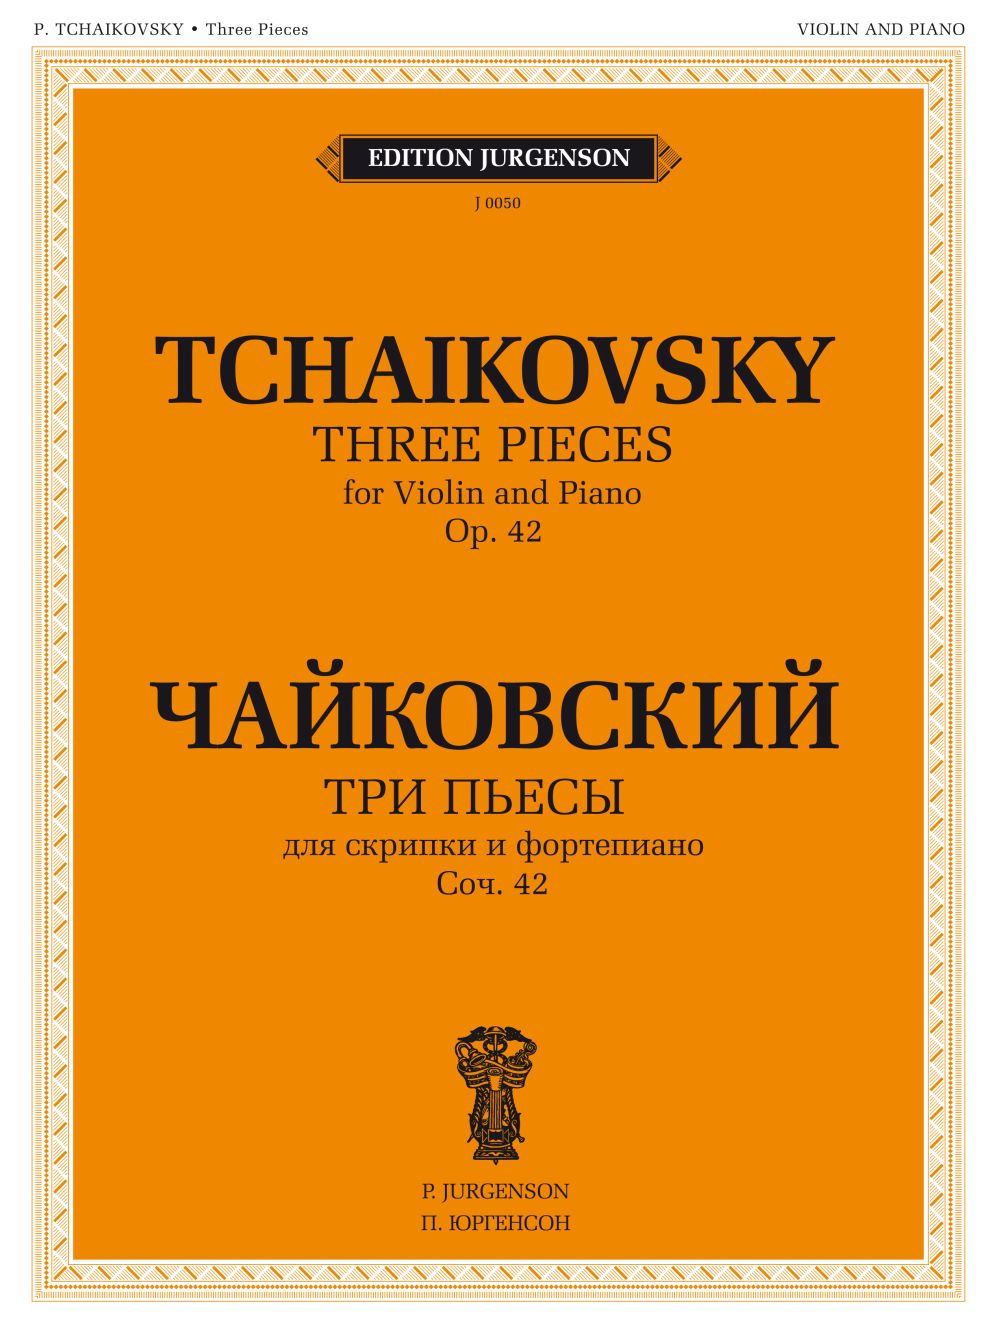 3 Pieces, Op. 42 For Violin And Piano (TCHAIKOVSKY PYOTR ILYICH)